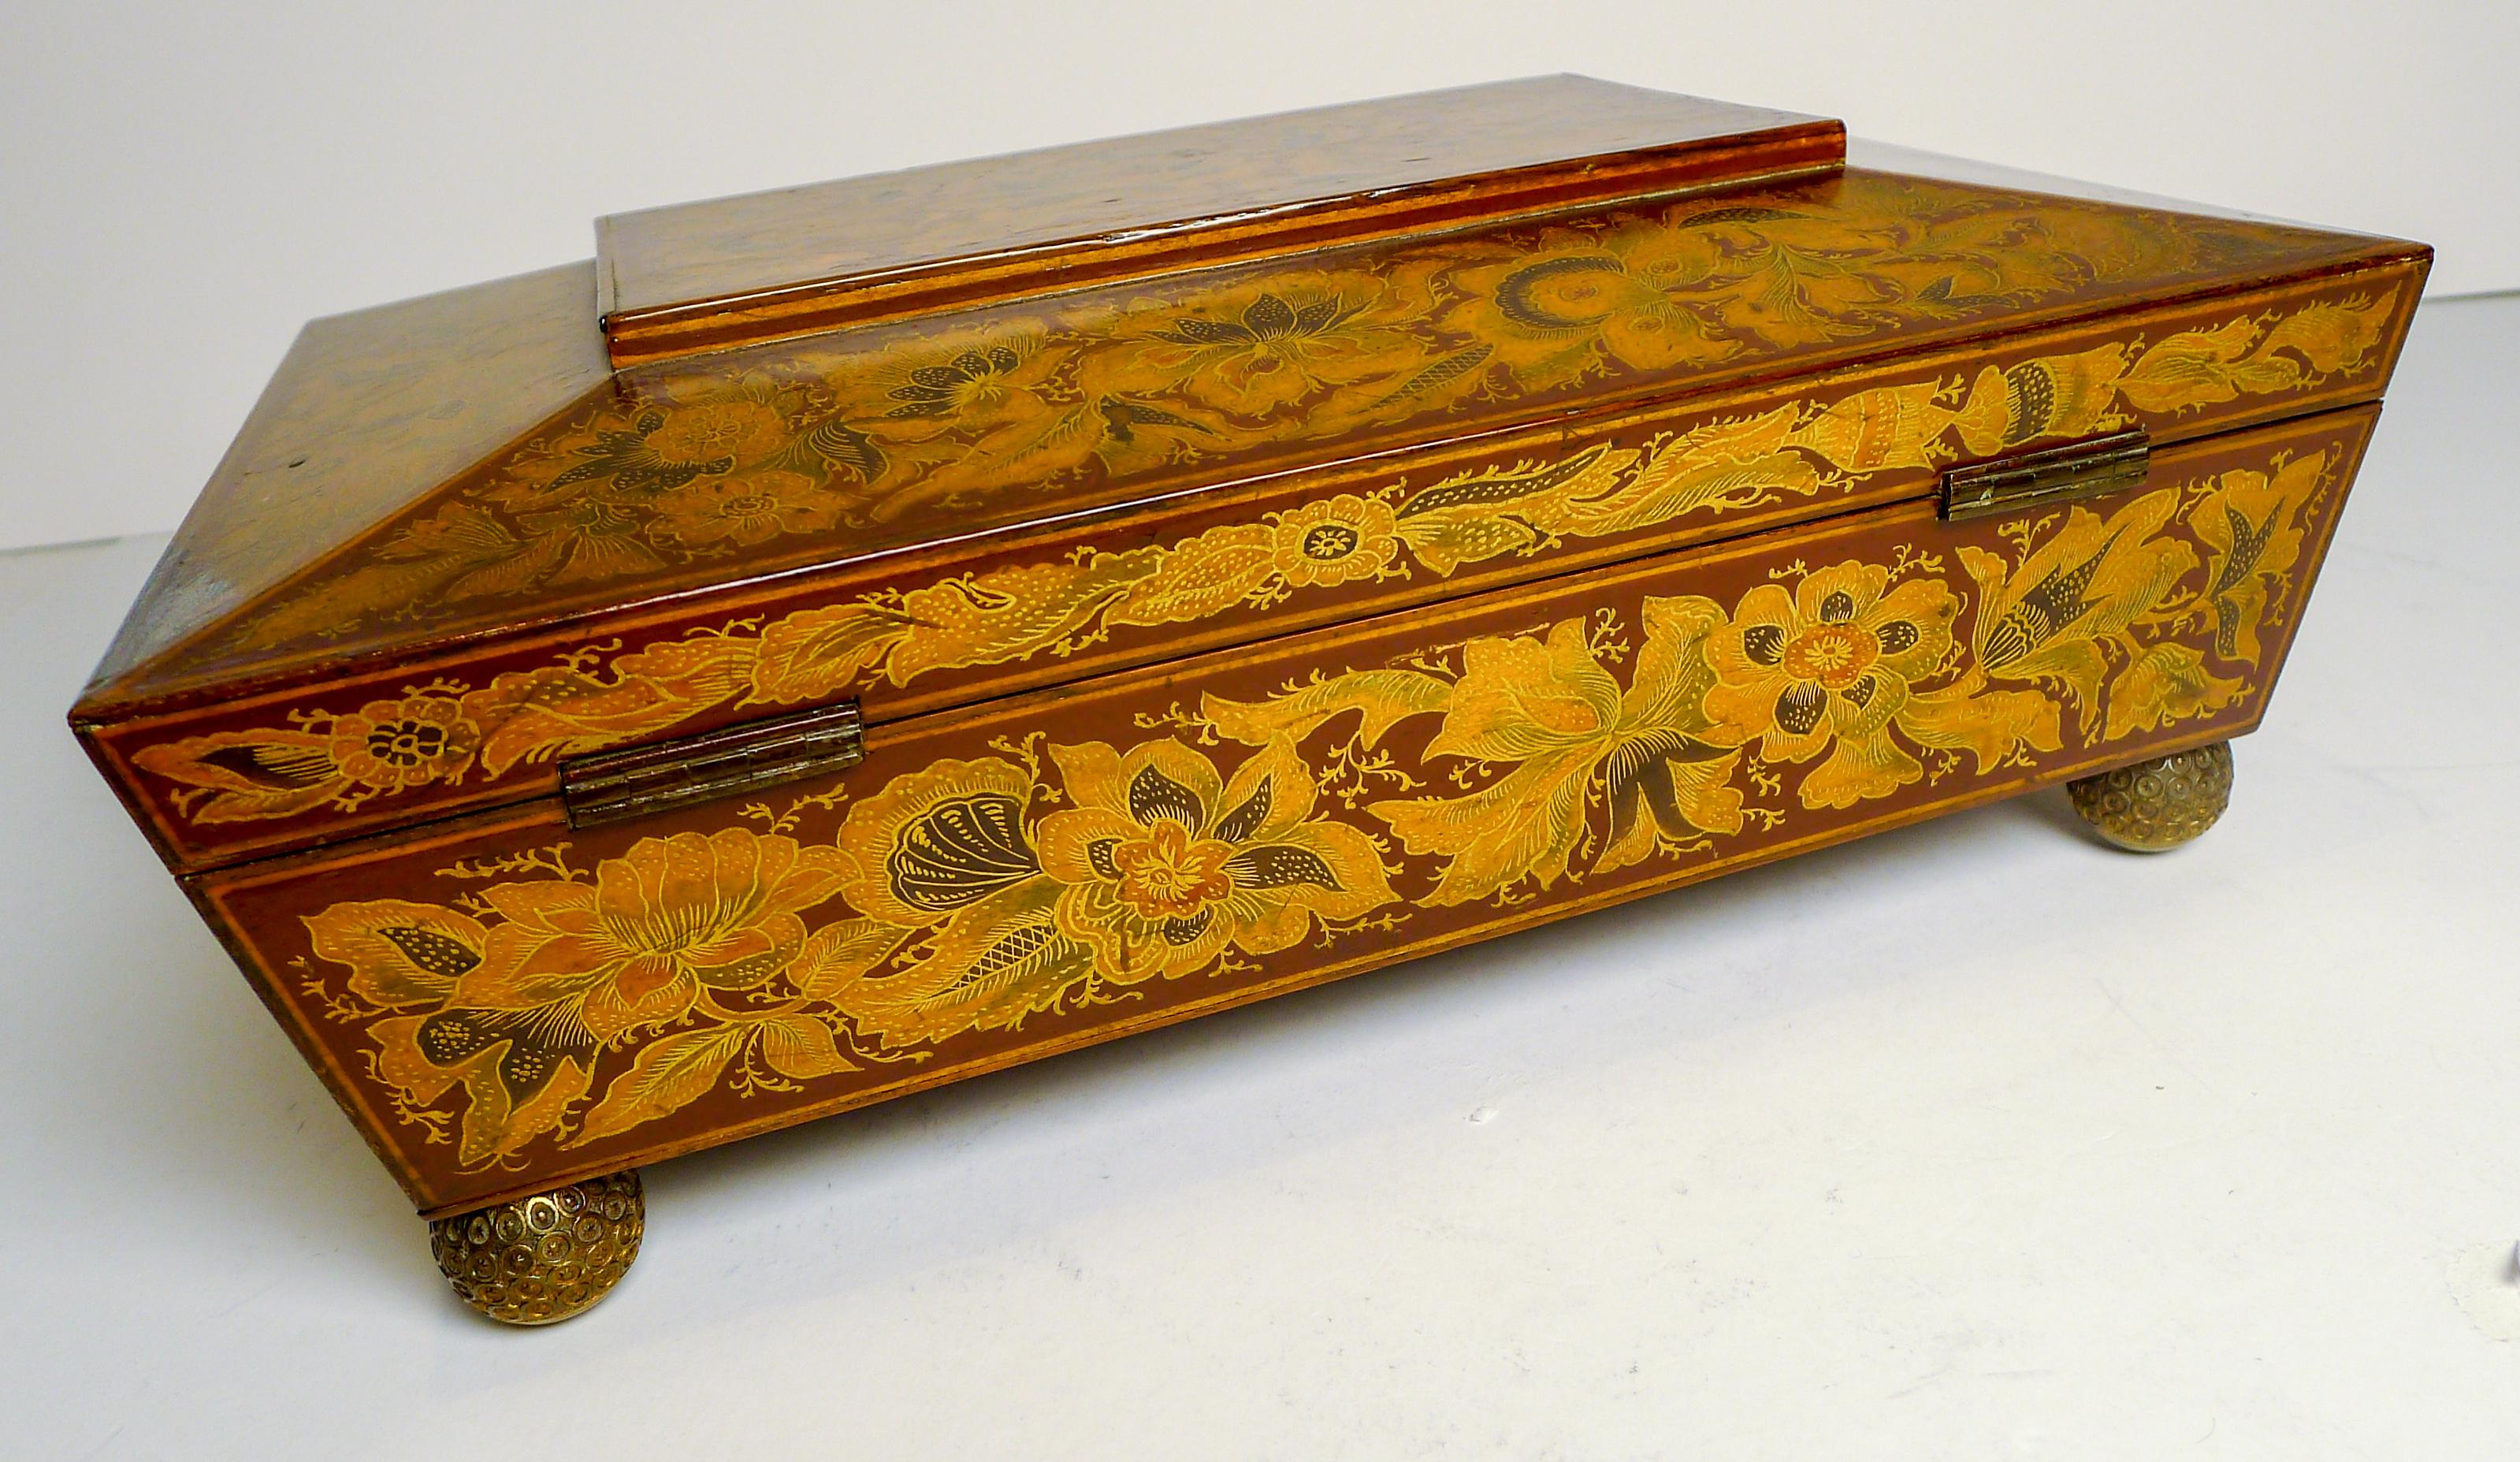 Stunning Antique English Regency Penwork Games Box c.1820 In Good Condition For Sale In Bath, GB